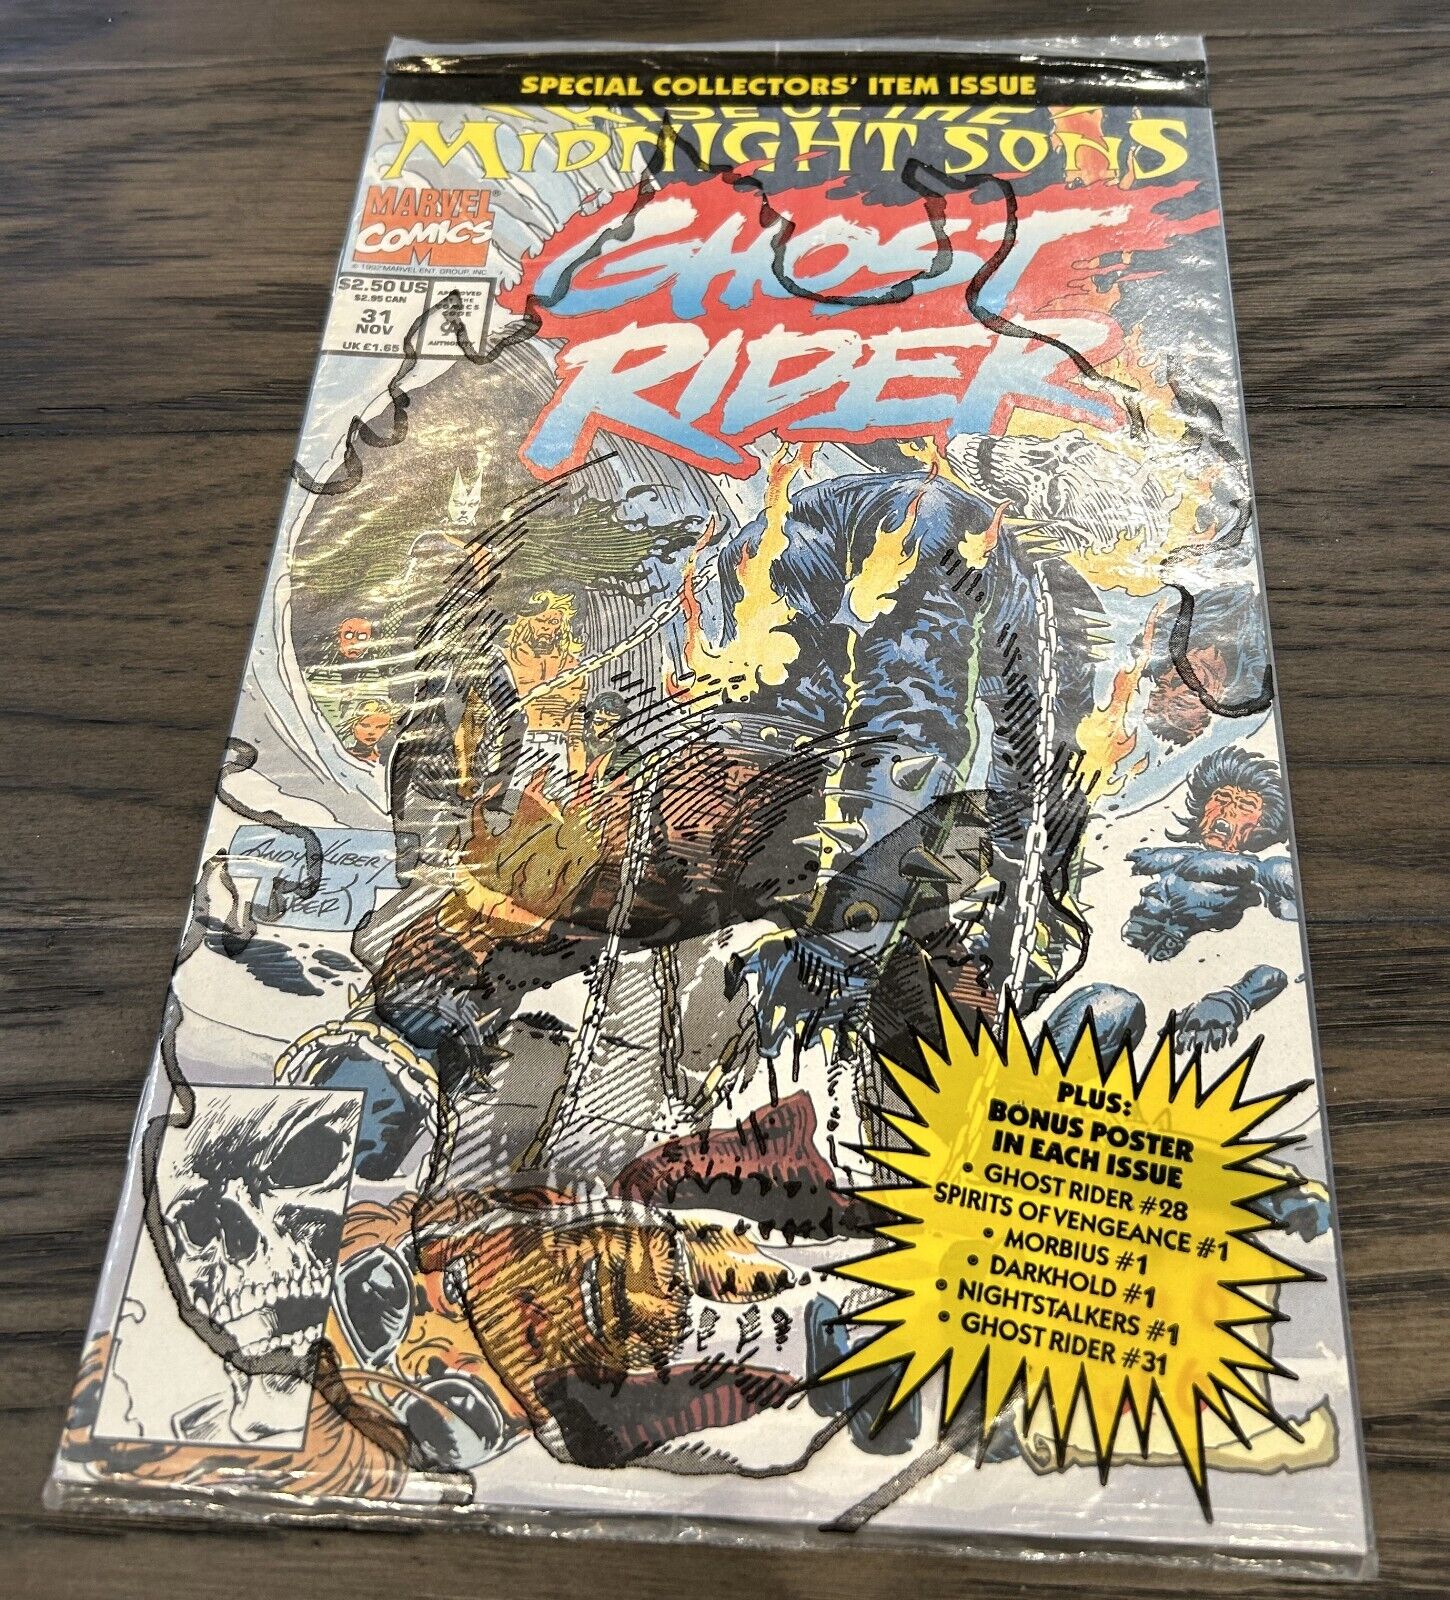 1992 GHOST RIDER (vol2) #31 9.6 Bagged Sealed 1st Full app MIDNIGHT SONS Book